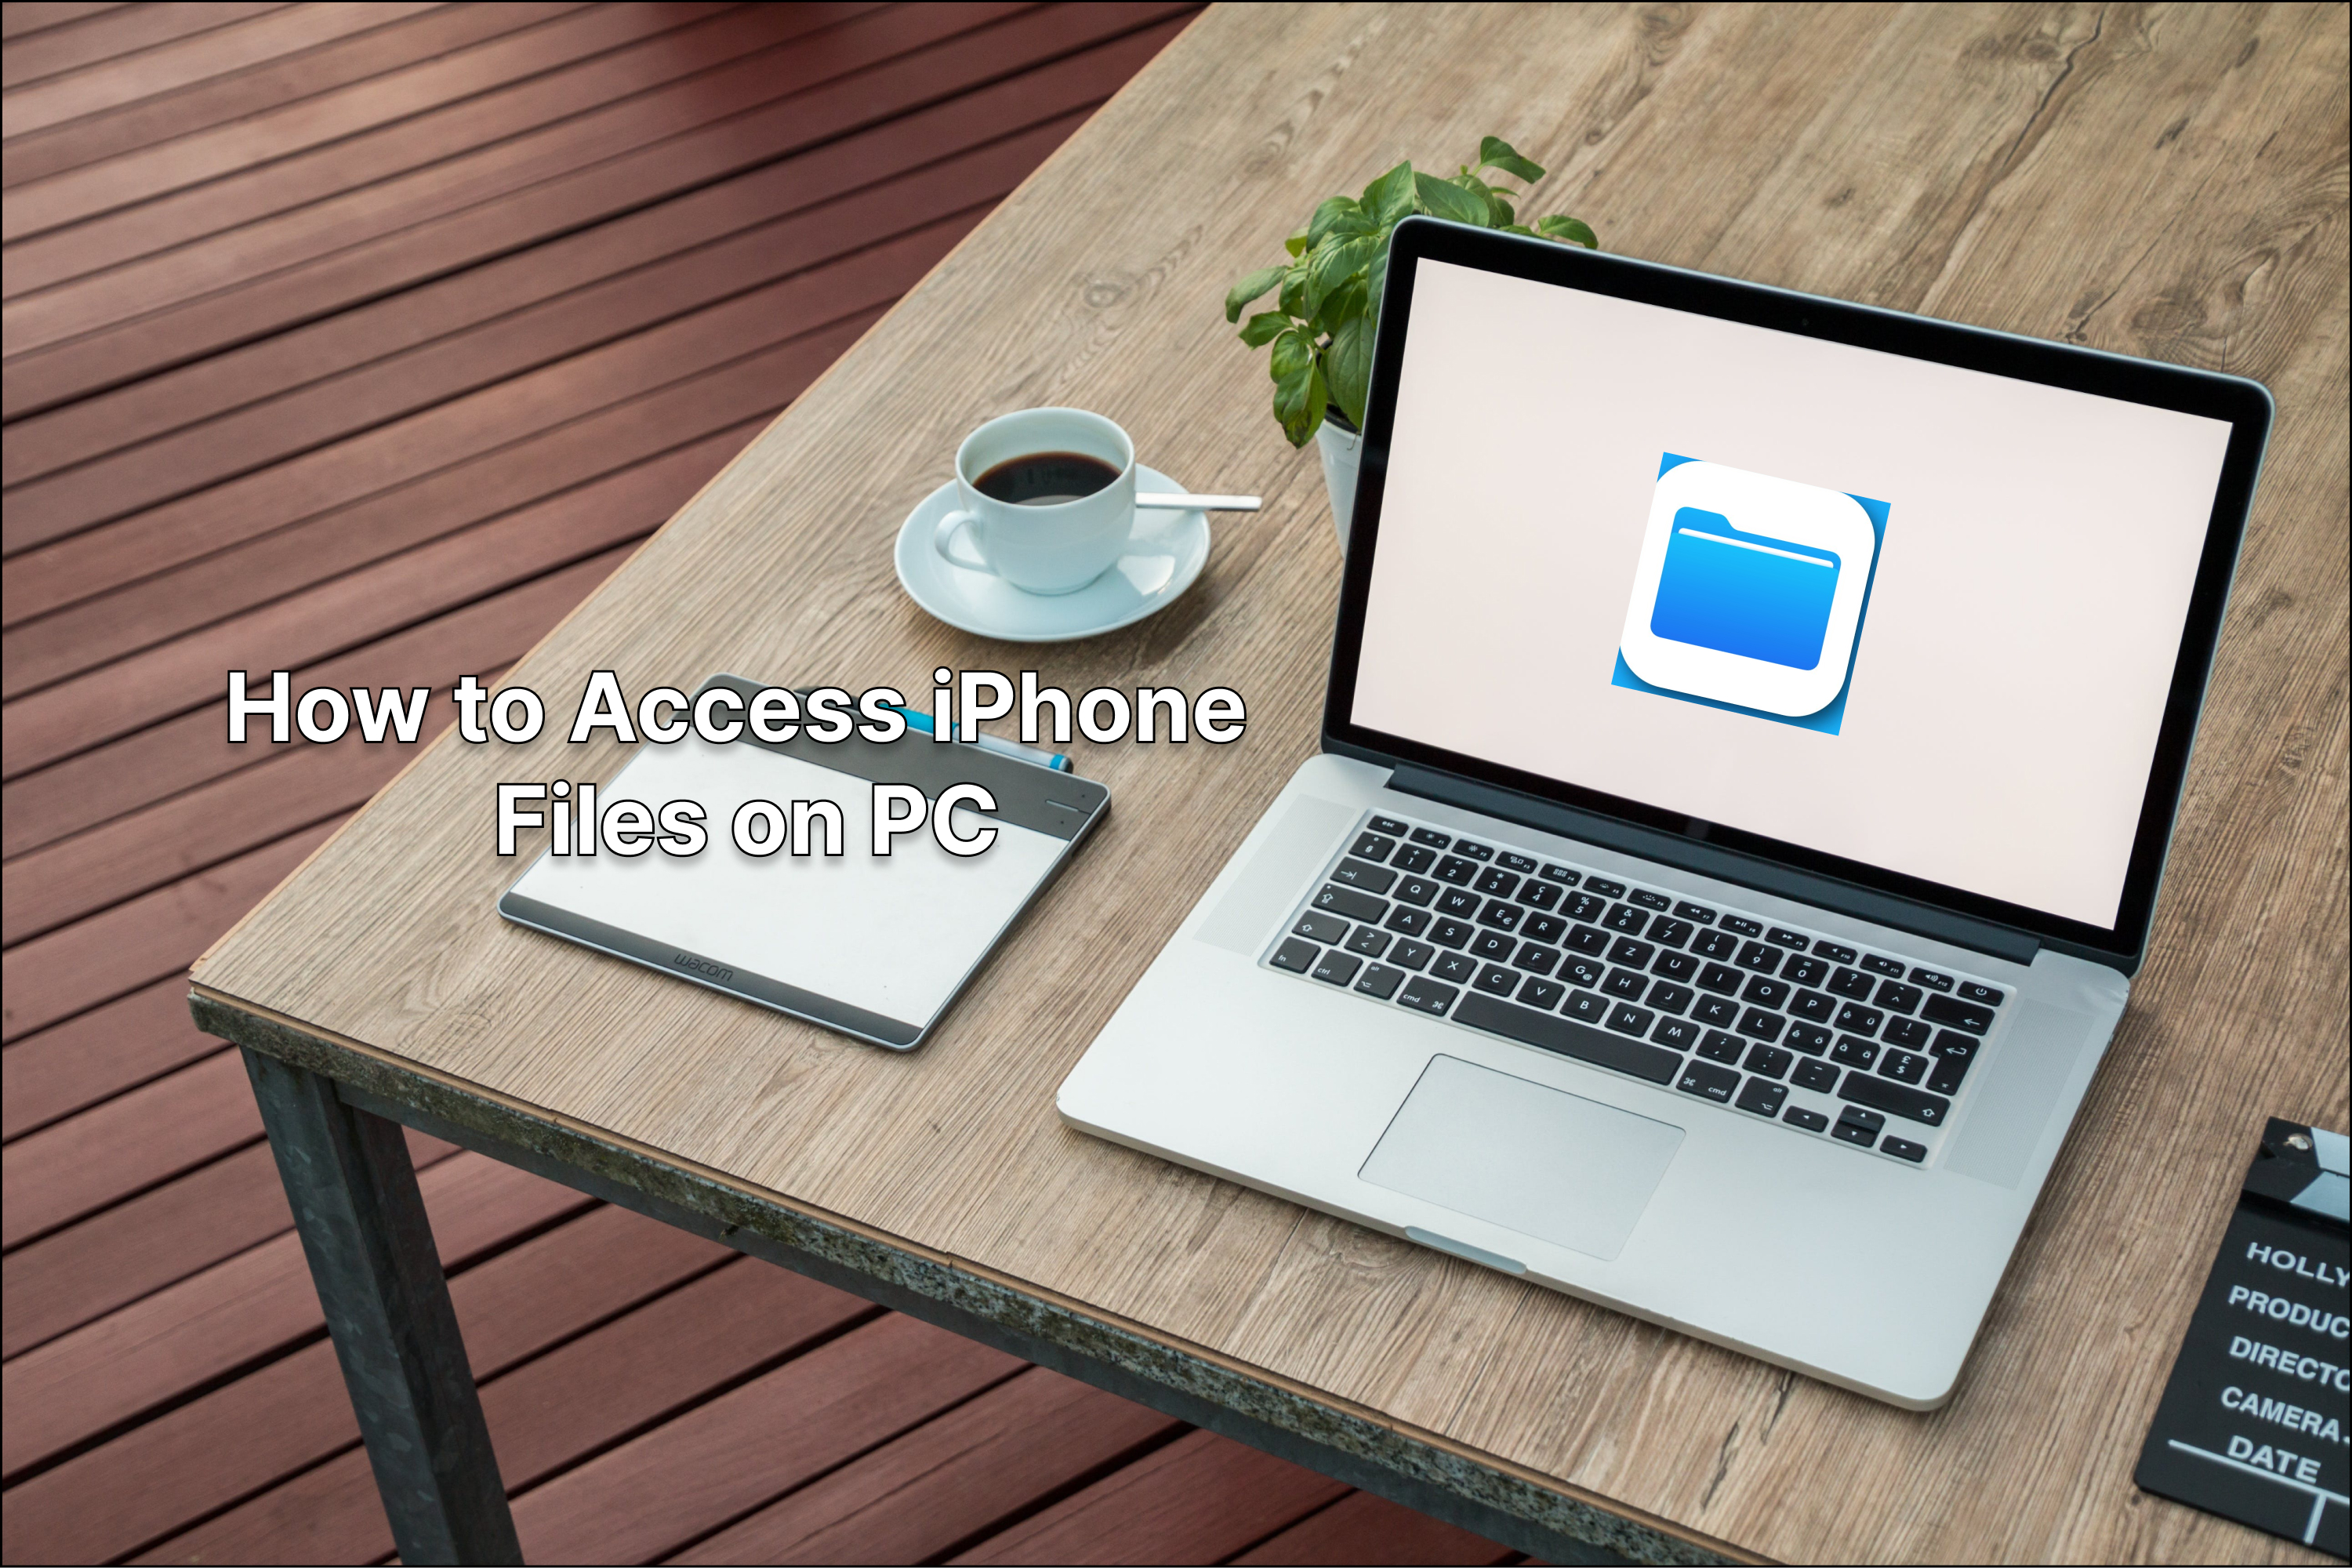 Easy Guide on How to Access iPhone Files on PC